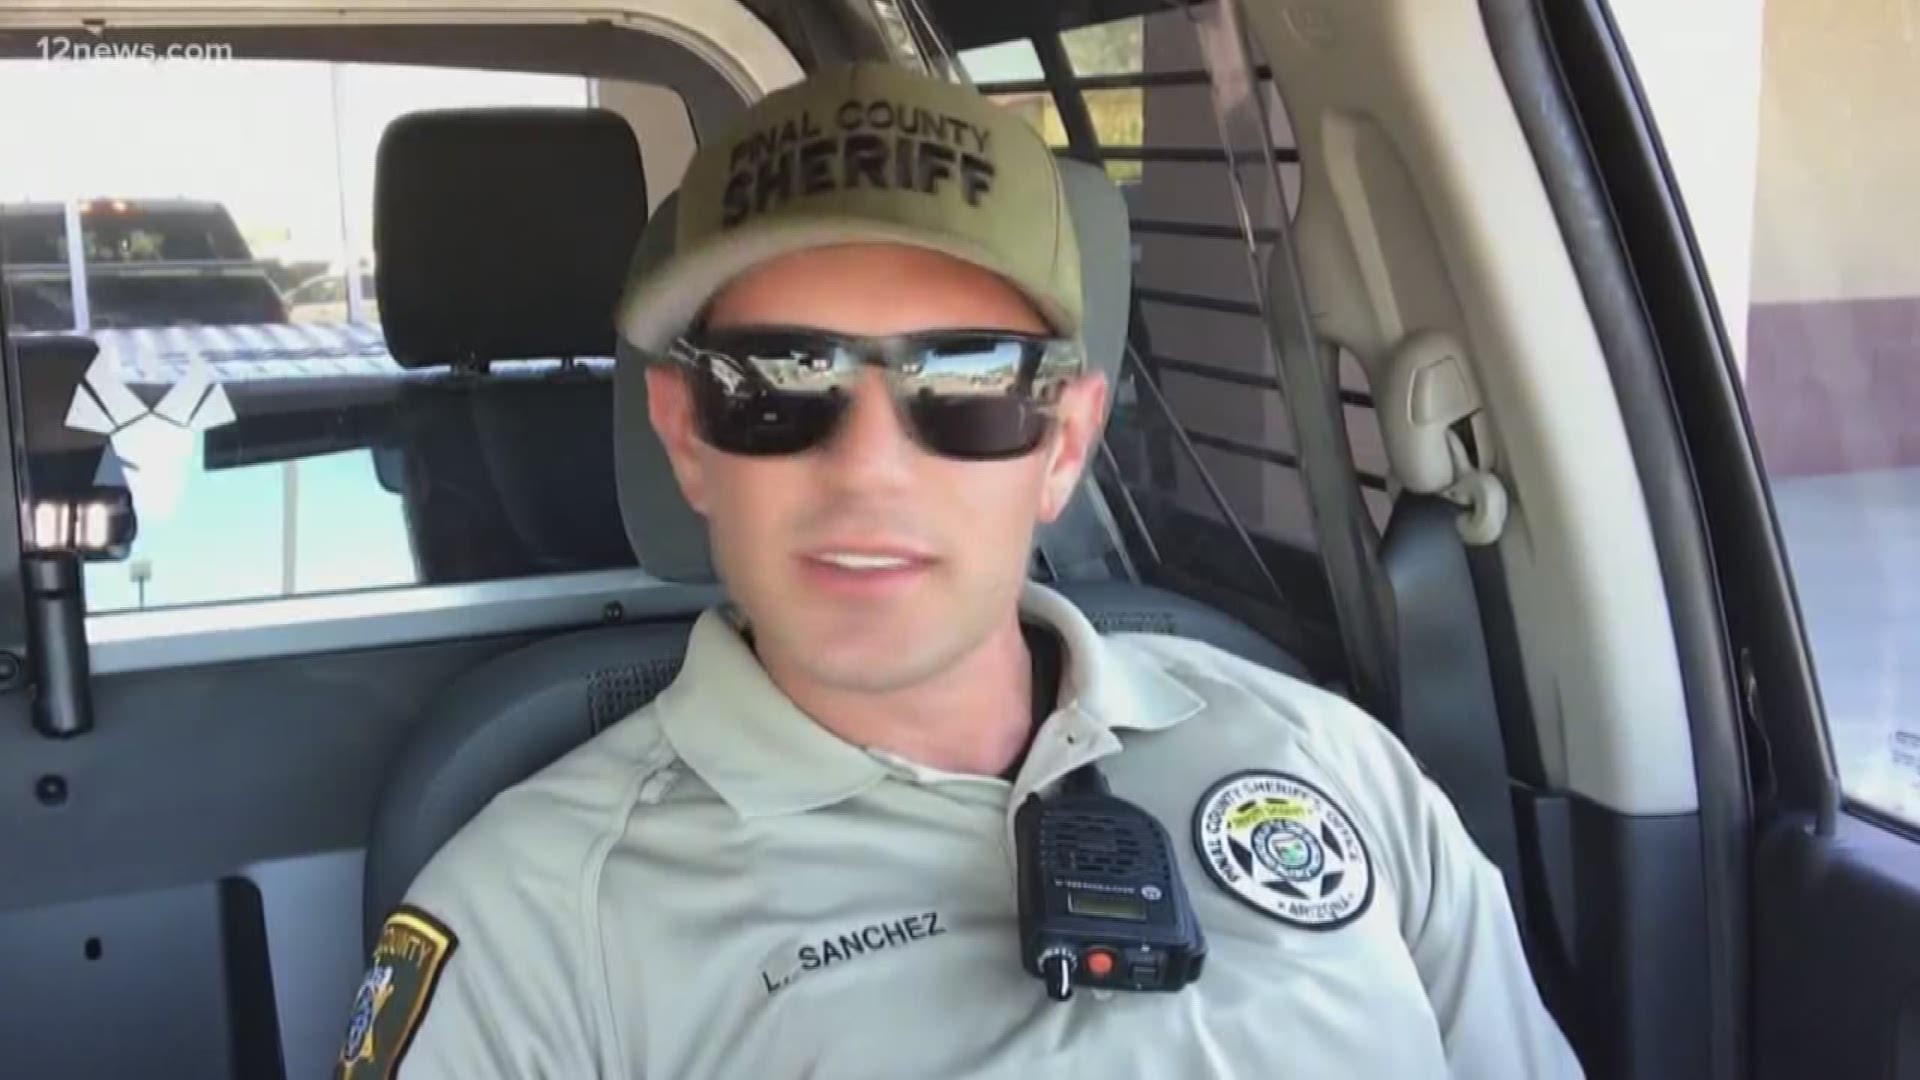 Officers in Pinal and Maricopa counties are having their own lip sync battle. Using hits from T-Swift and Calvin Harris, these officers show off their moves in viral videos.